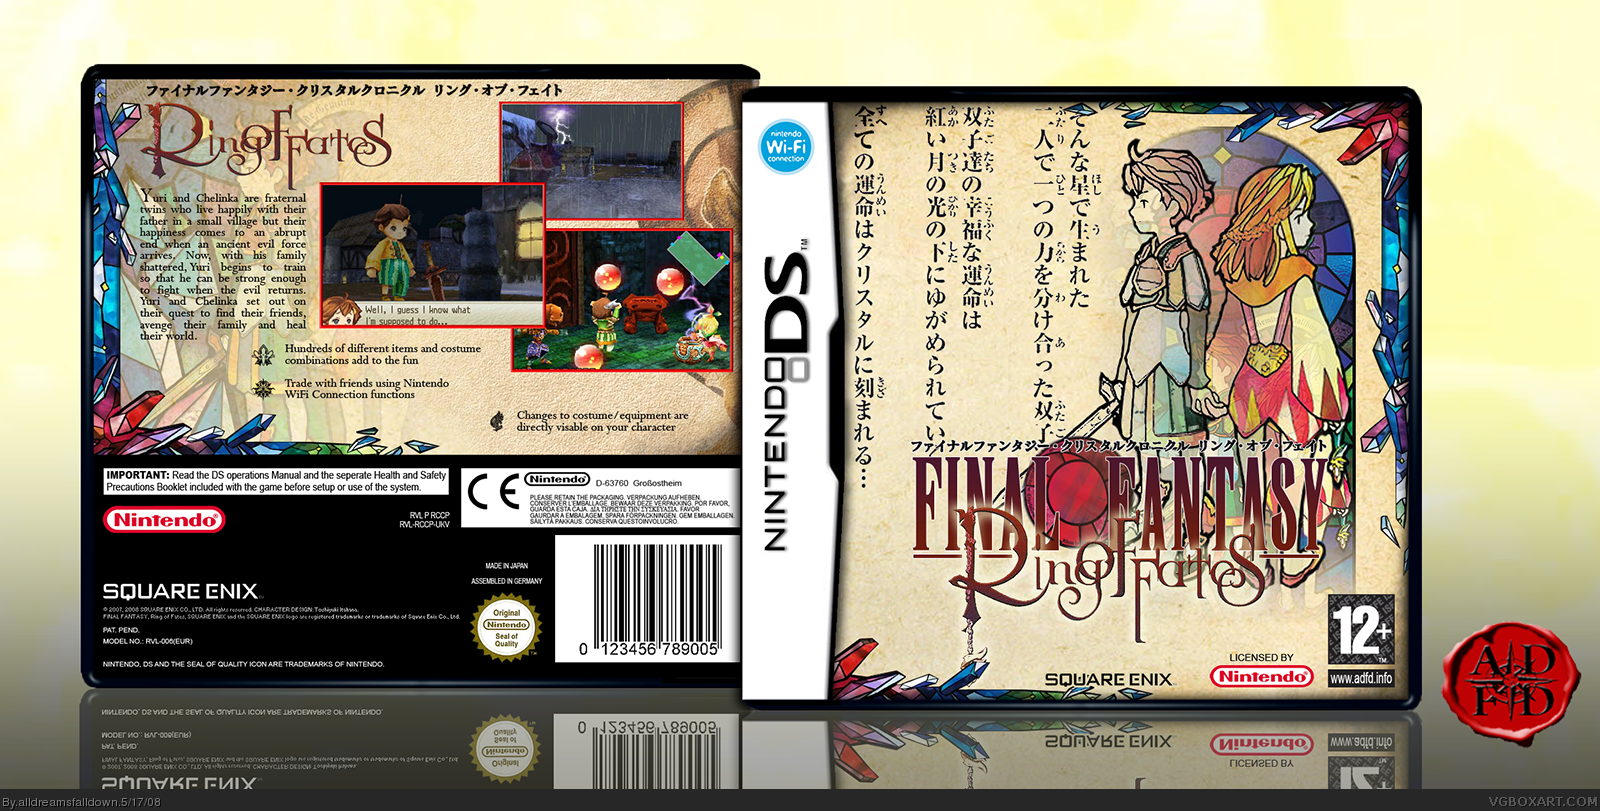 Final Fantasy Crystal Chronicles: Ring of Fates box cover